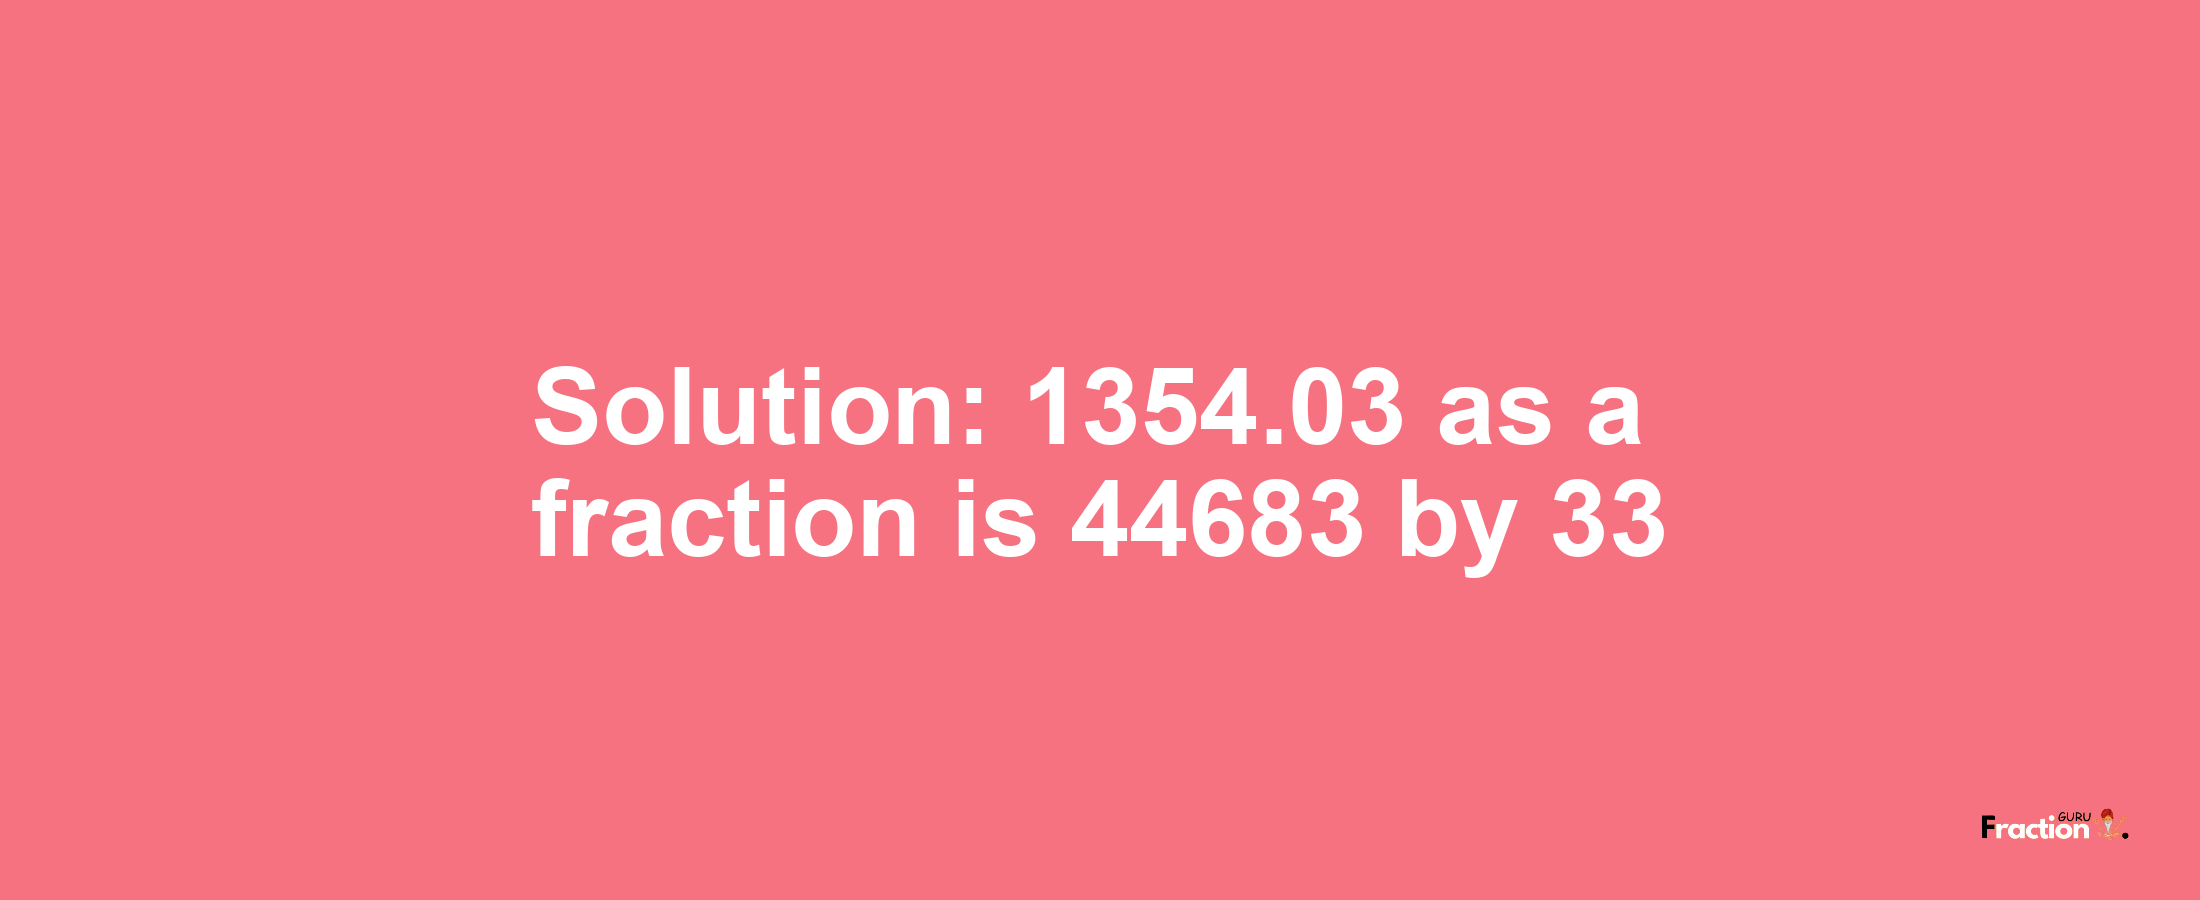 Solution:1354.03 as a fraction is 44683/33